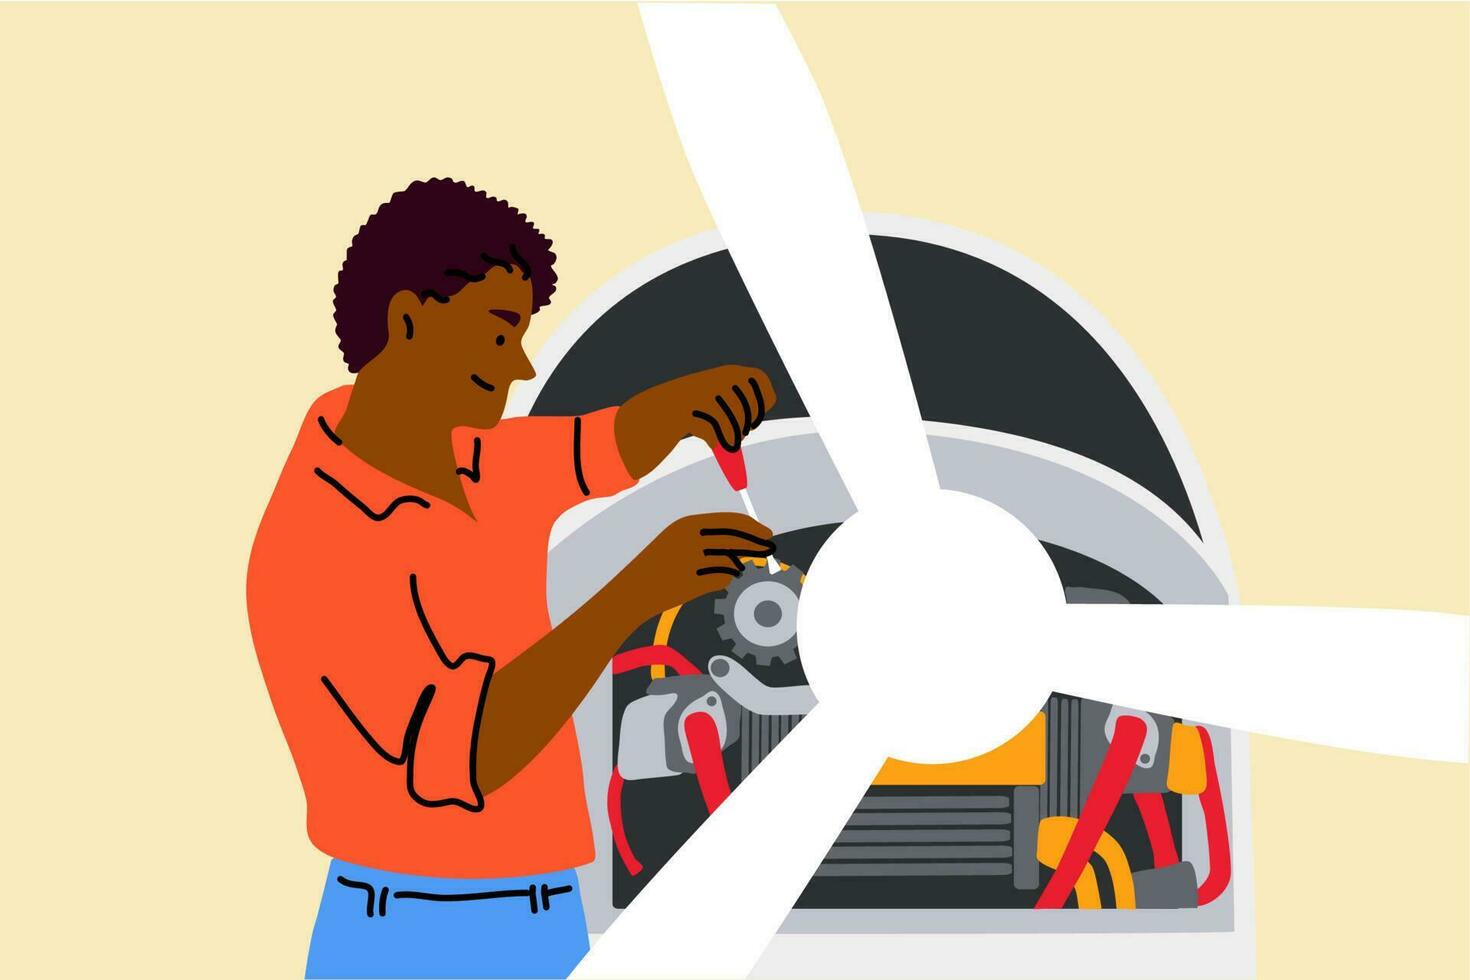 Work, repair, engineering, mechanics concept. Young smiling african american man or guy mechanic character inspecting and working on airplane jet engine in hangar. Aircraft maintenance illustration. vector